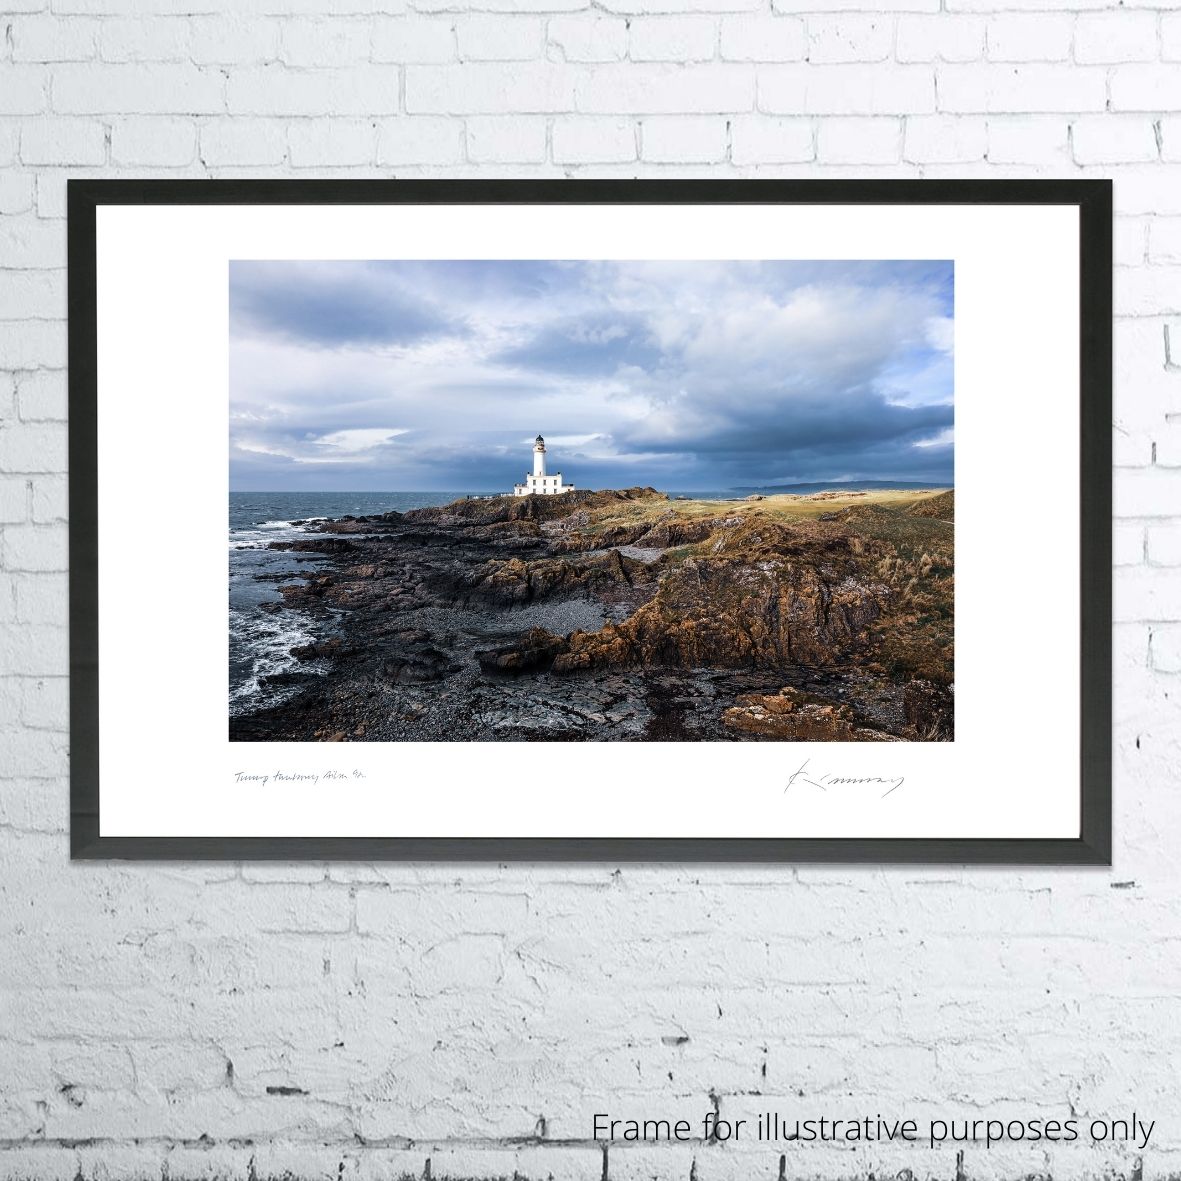 A framed photo of the 9th at Trump Turnberry Ailsa by Kevin Murray.